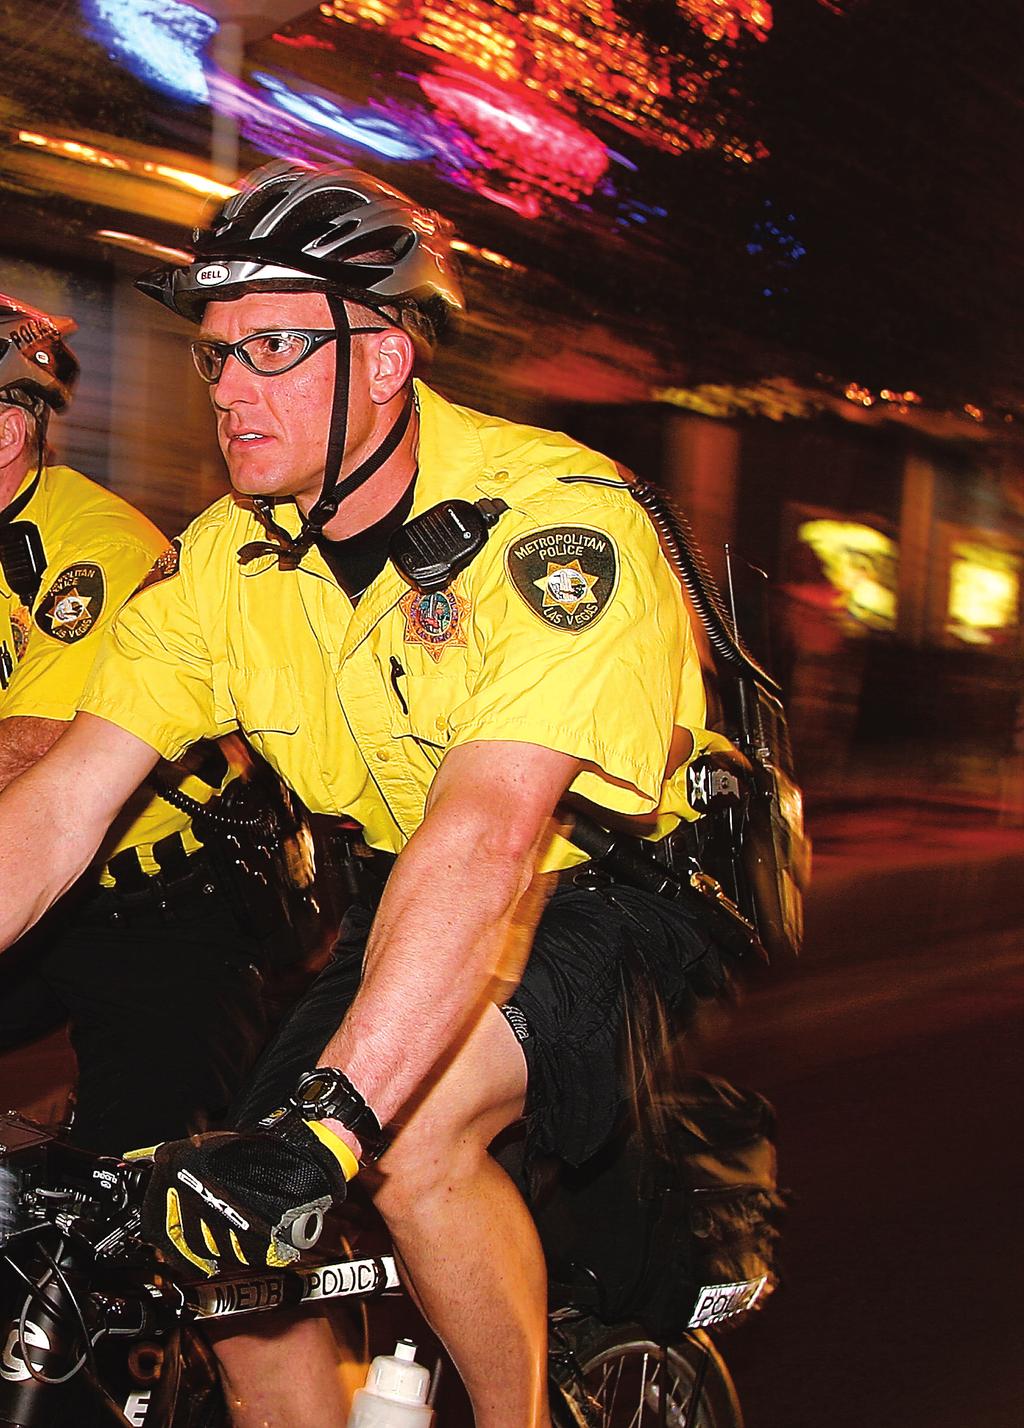 A bike unit can be a boon to your departments investigations, as well as